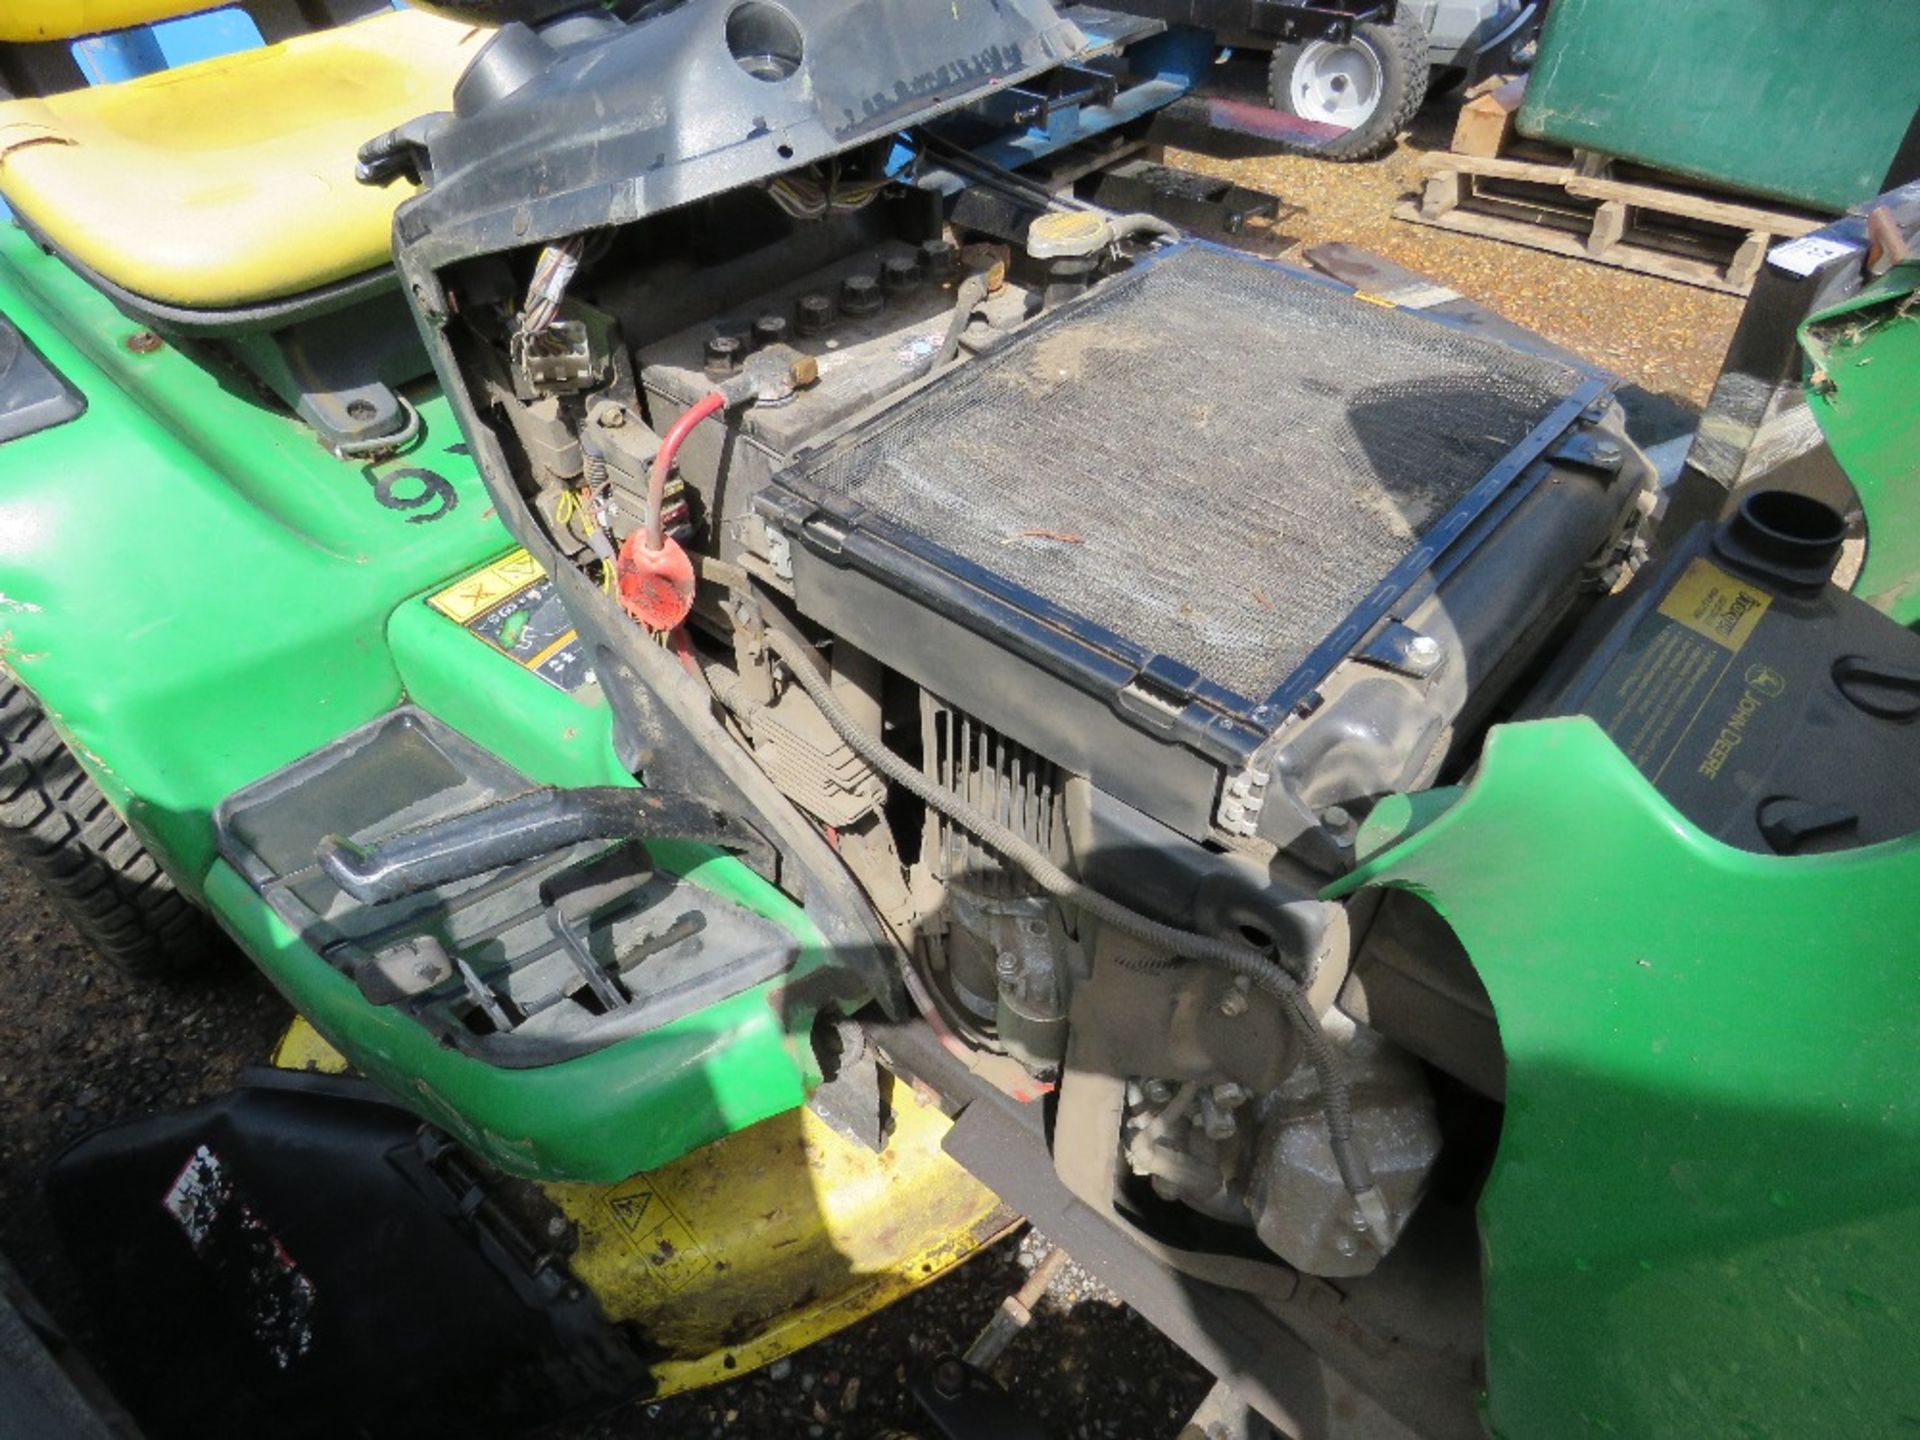 JOHN DEERE X540 PROFESSIONAL RIDE ON MOWER, PREVIOUS COUNCIL USEAGE. STRAIGHT FROM STORAGE, NO KEY - Image 5 of 6